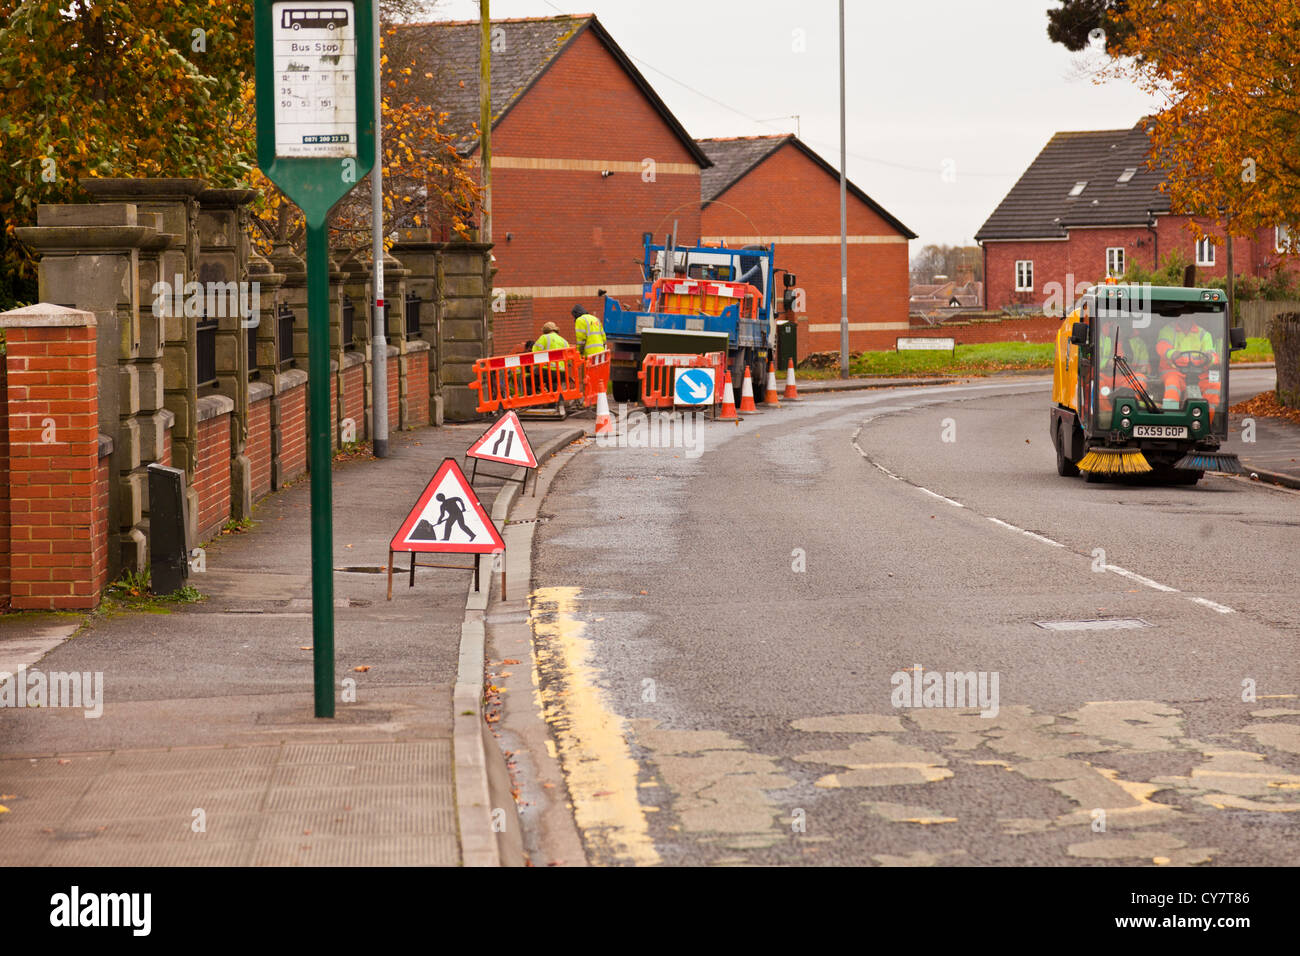 Road works being carried out on bend of main road. Stock Photo